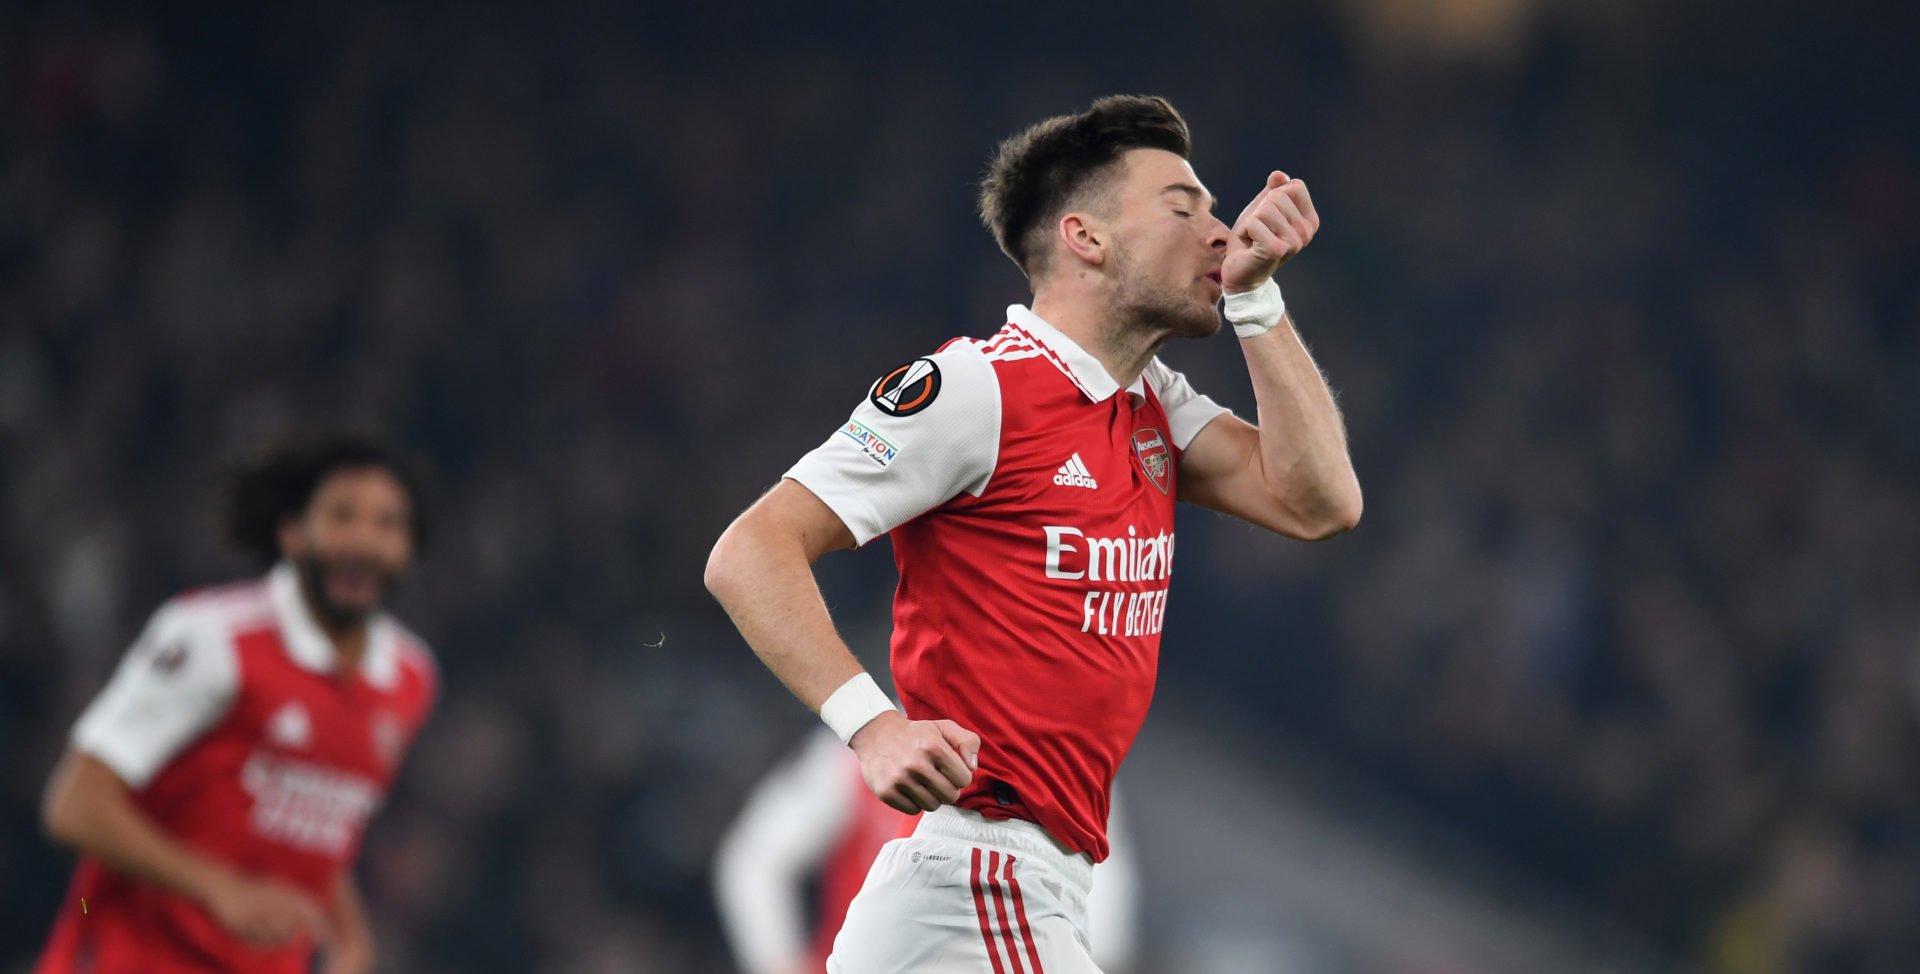 Transfer news: 'Kieran Tierney should be insulted by Arsenal's bids' –  Chris Sutton slams efforts to land Scottish talent on the cheap